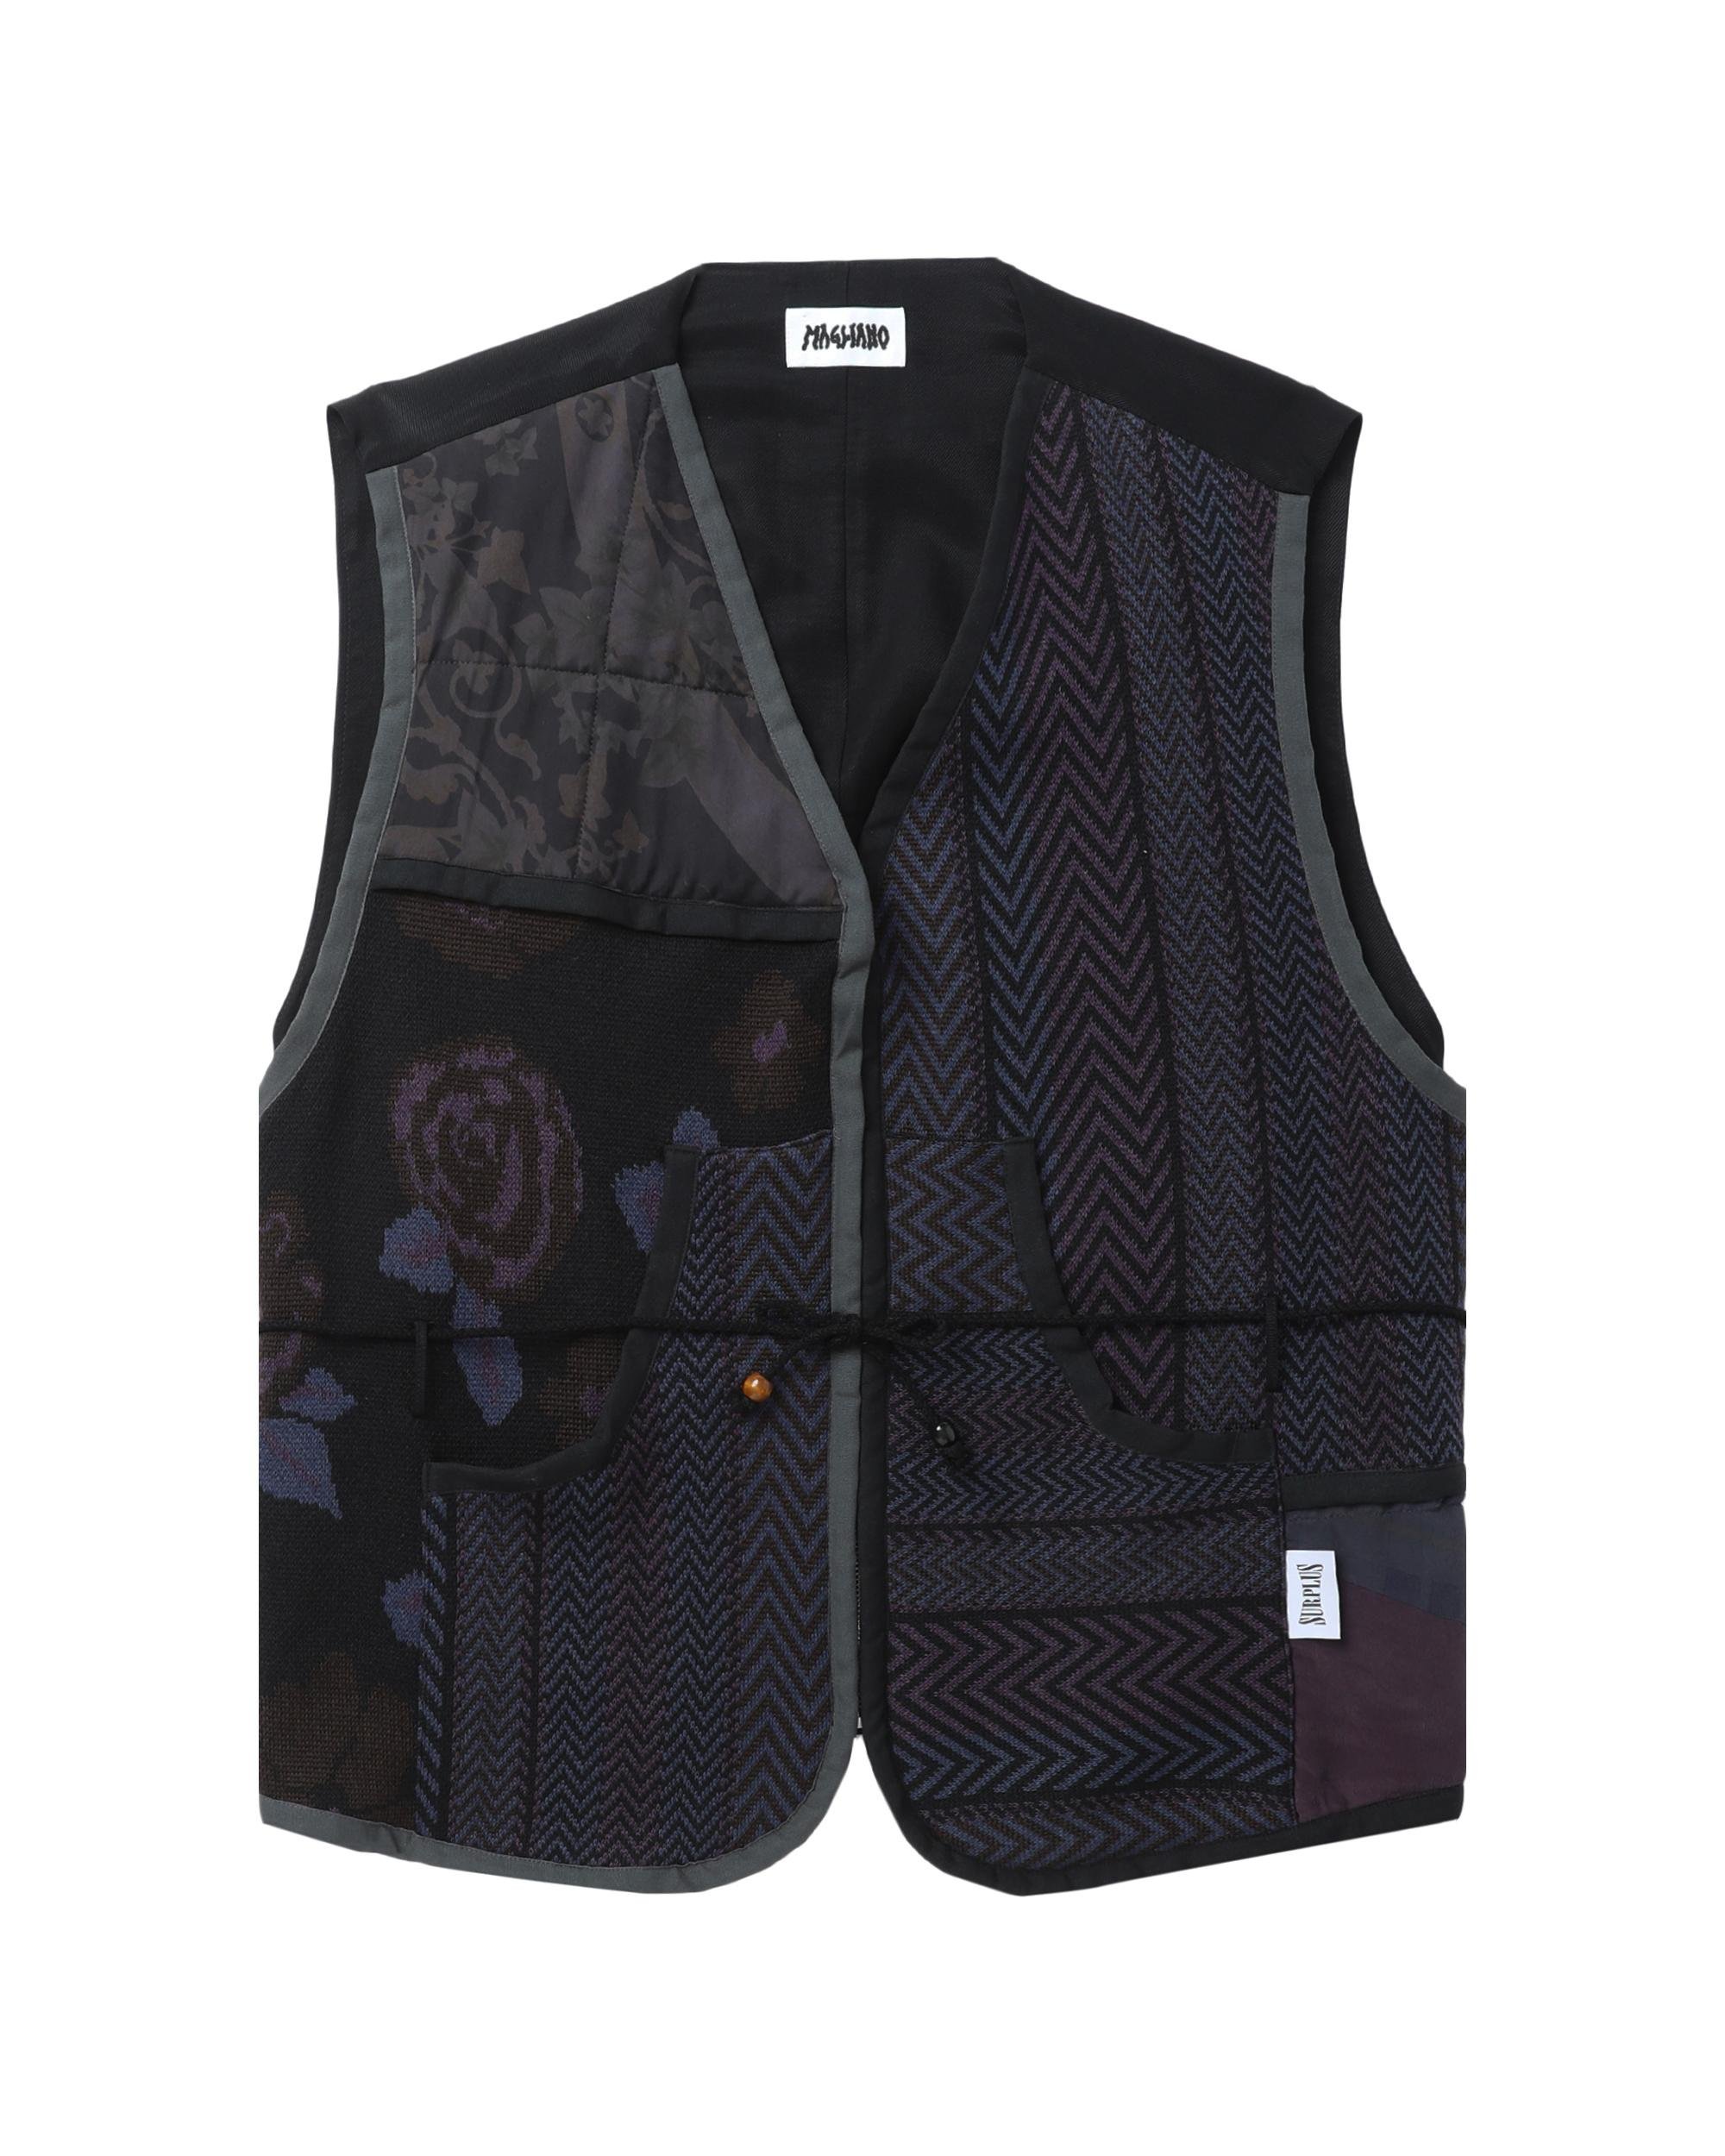 Patchwork vest by MAGLIANO